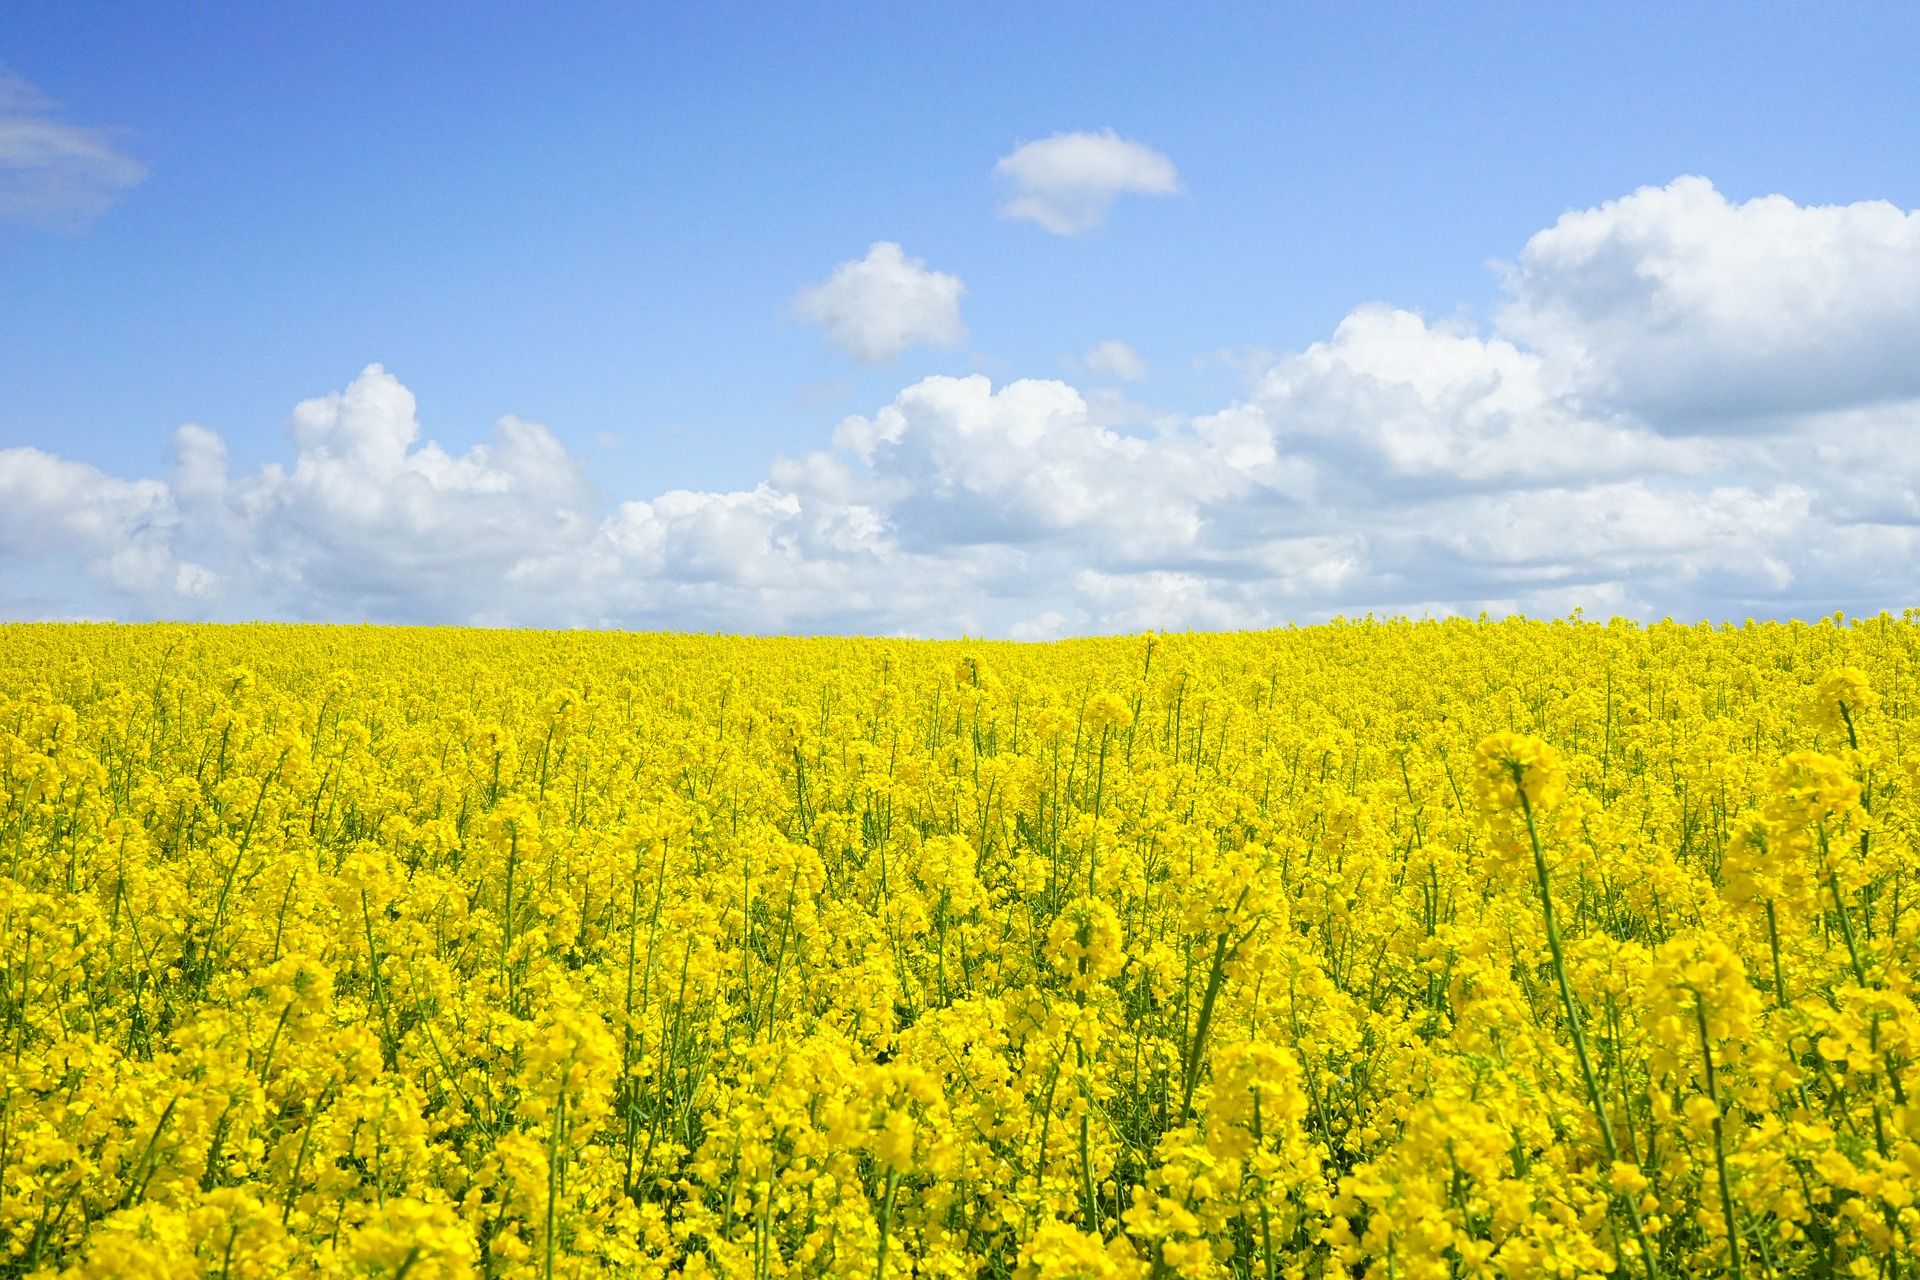 Canola, example of a new genetic engineering technique risk crop under the Non-GMO Project Standard